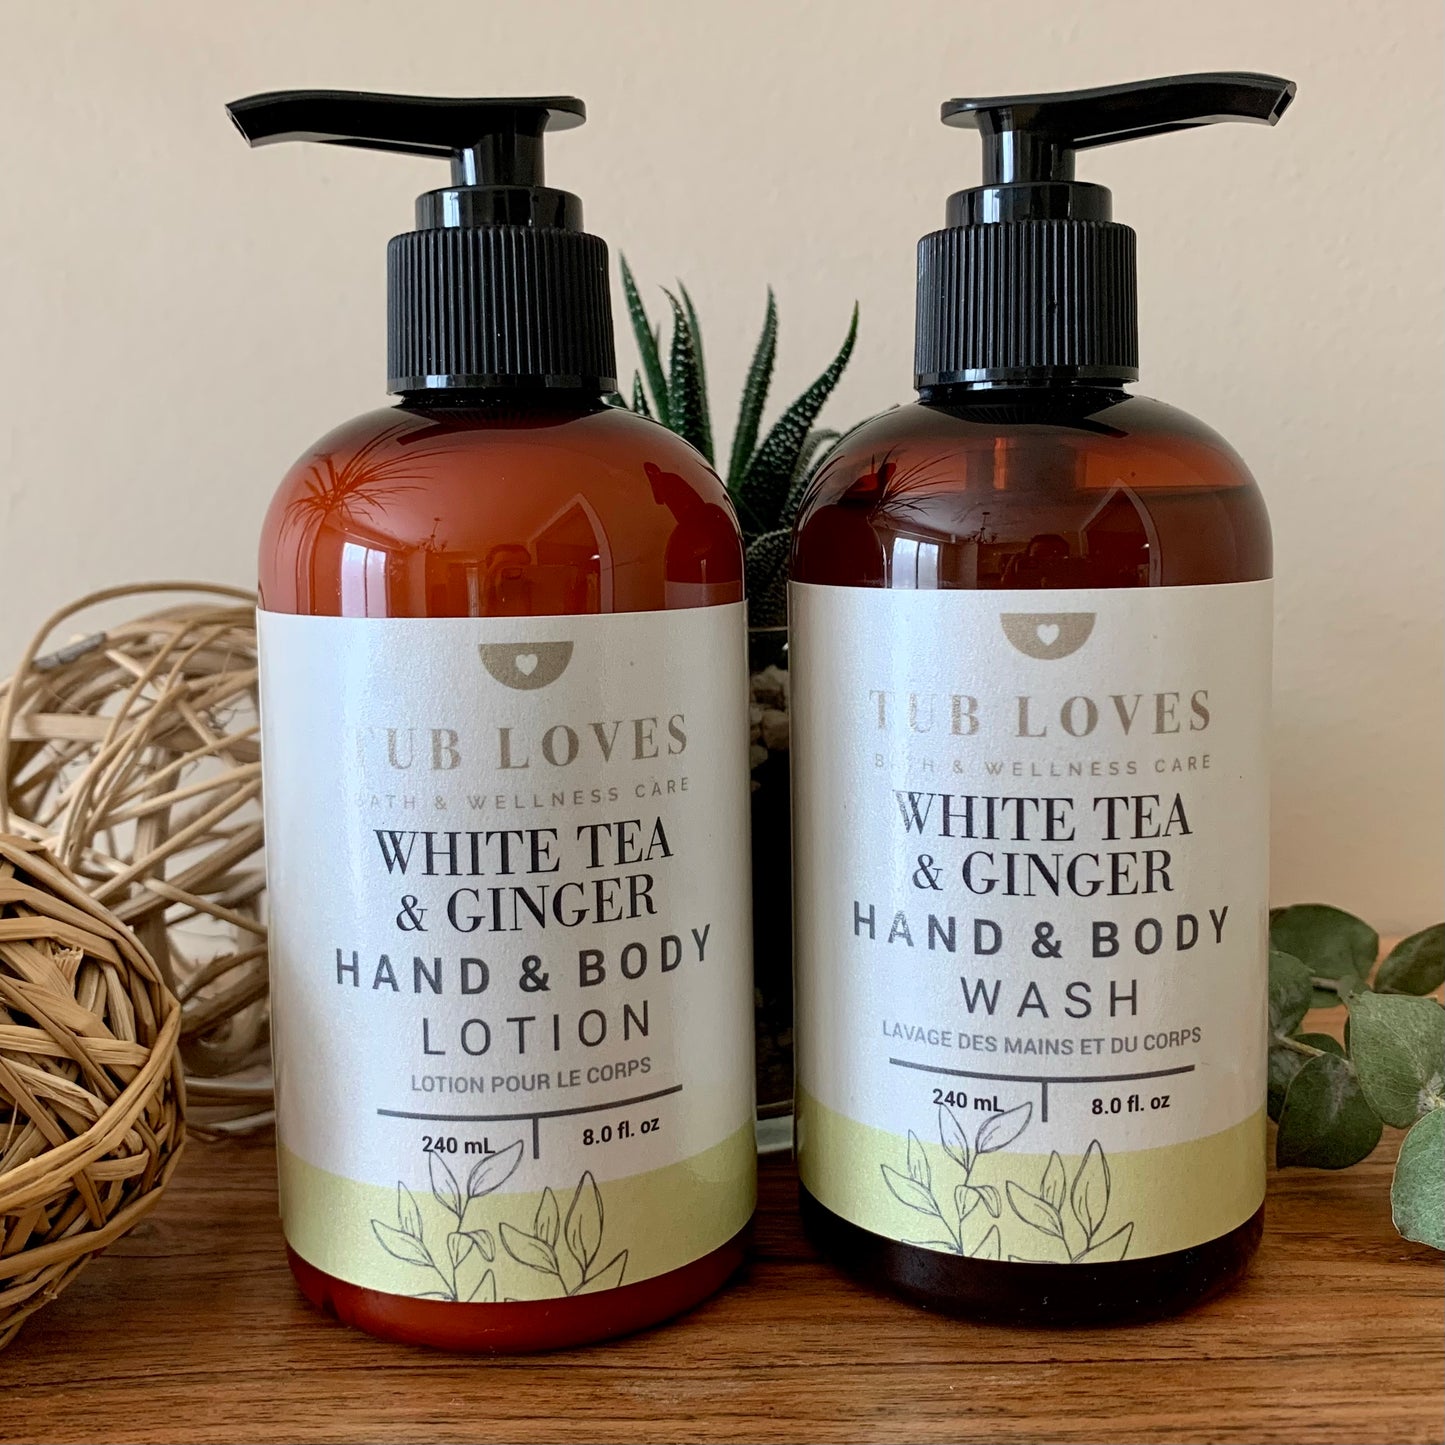 White Tea & Ginger - Hand and Body Wash